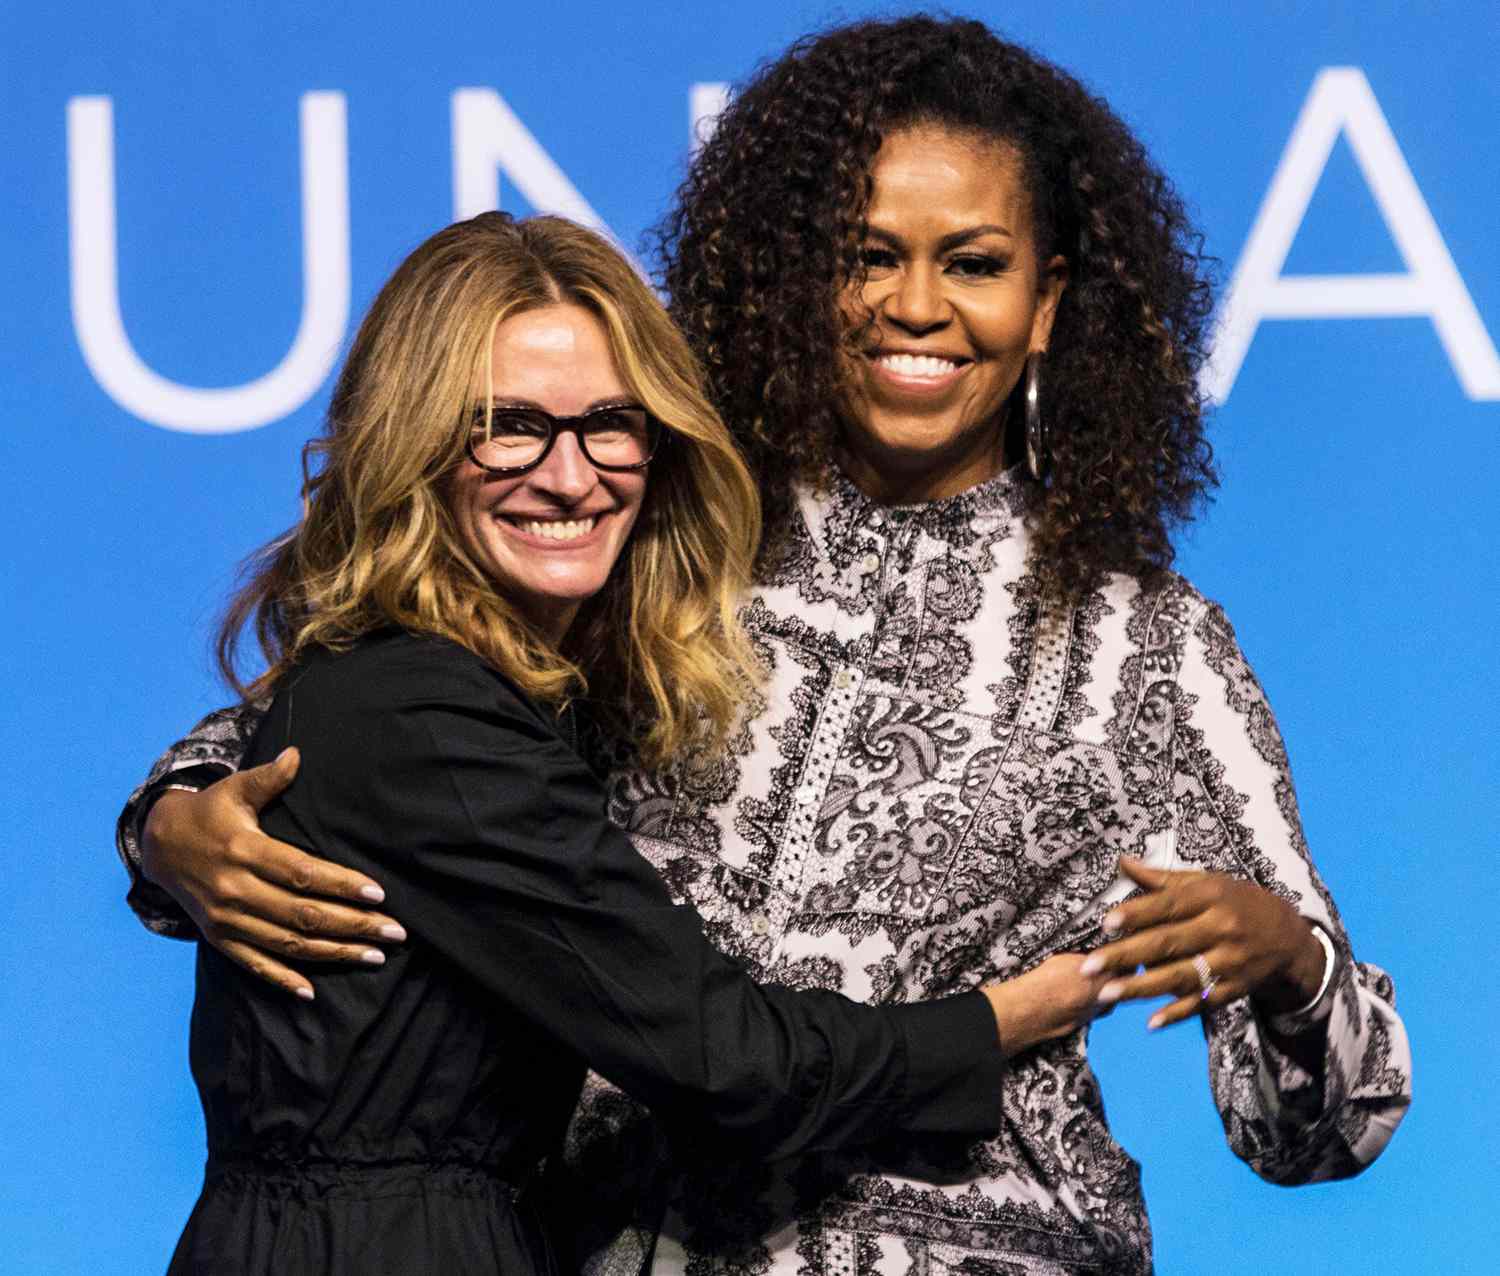 Former US first lady Michelle Obama (R) hugs US actress Julia Roberts at the end of an Obama Foundation event in Kuala Lumpur, Malaysia, 12 December 2019. Obama Foundation event in Kuala Lumpur, Malaysia - 12 Dec 2019